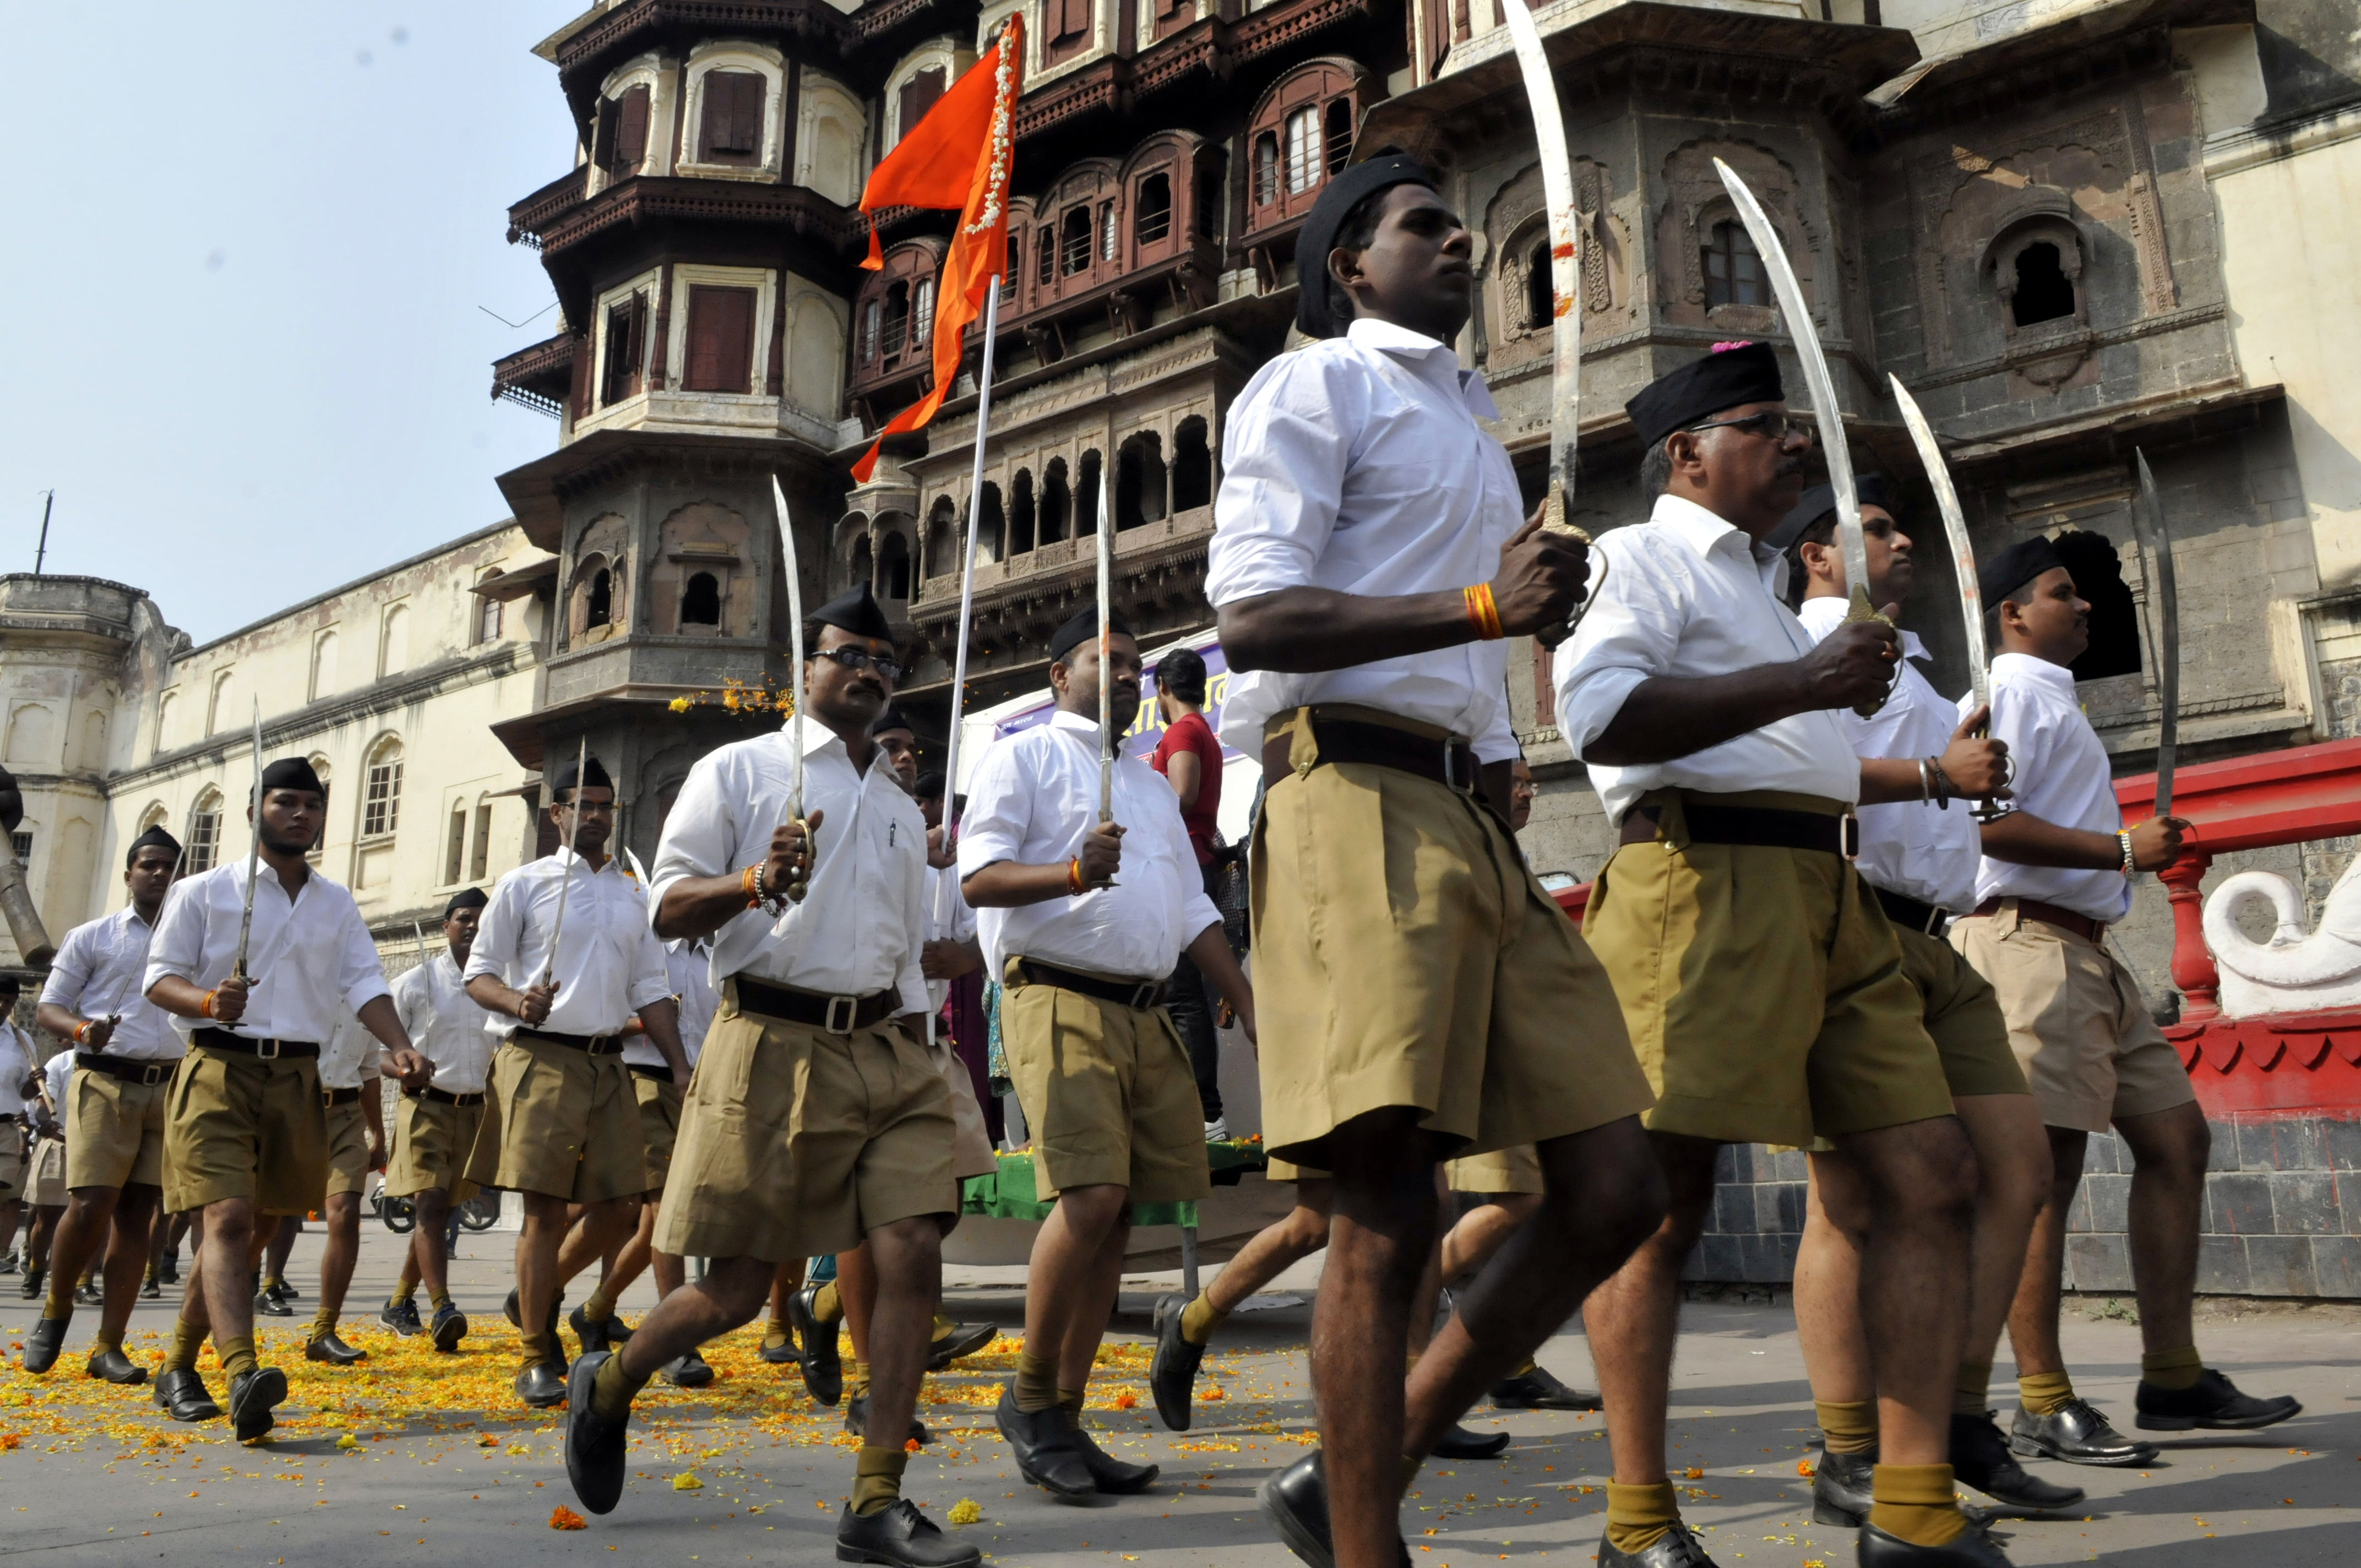 RSS volunteers queue up for an annual march at Jehangirabad area in Indore, India, on Oct. 22, 2015 (Arun Mondhe—HIndustan Times/Getty Images)